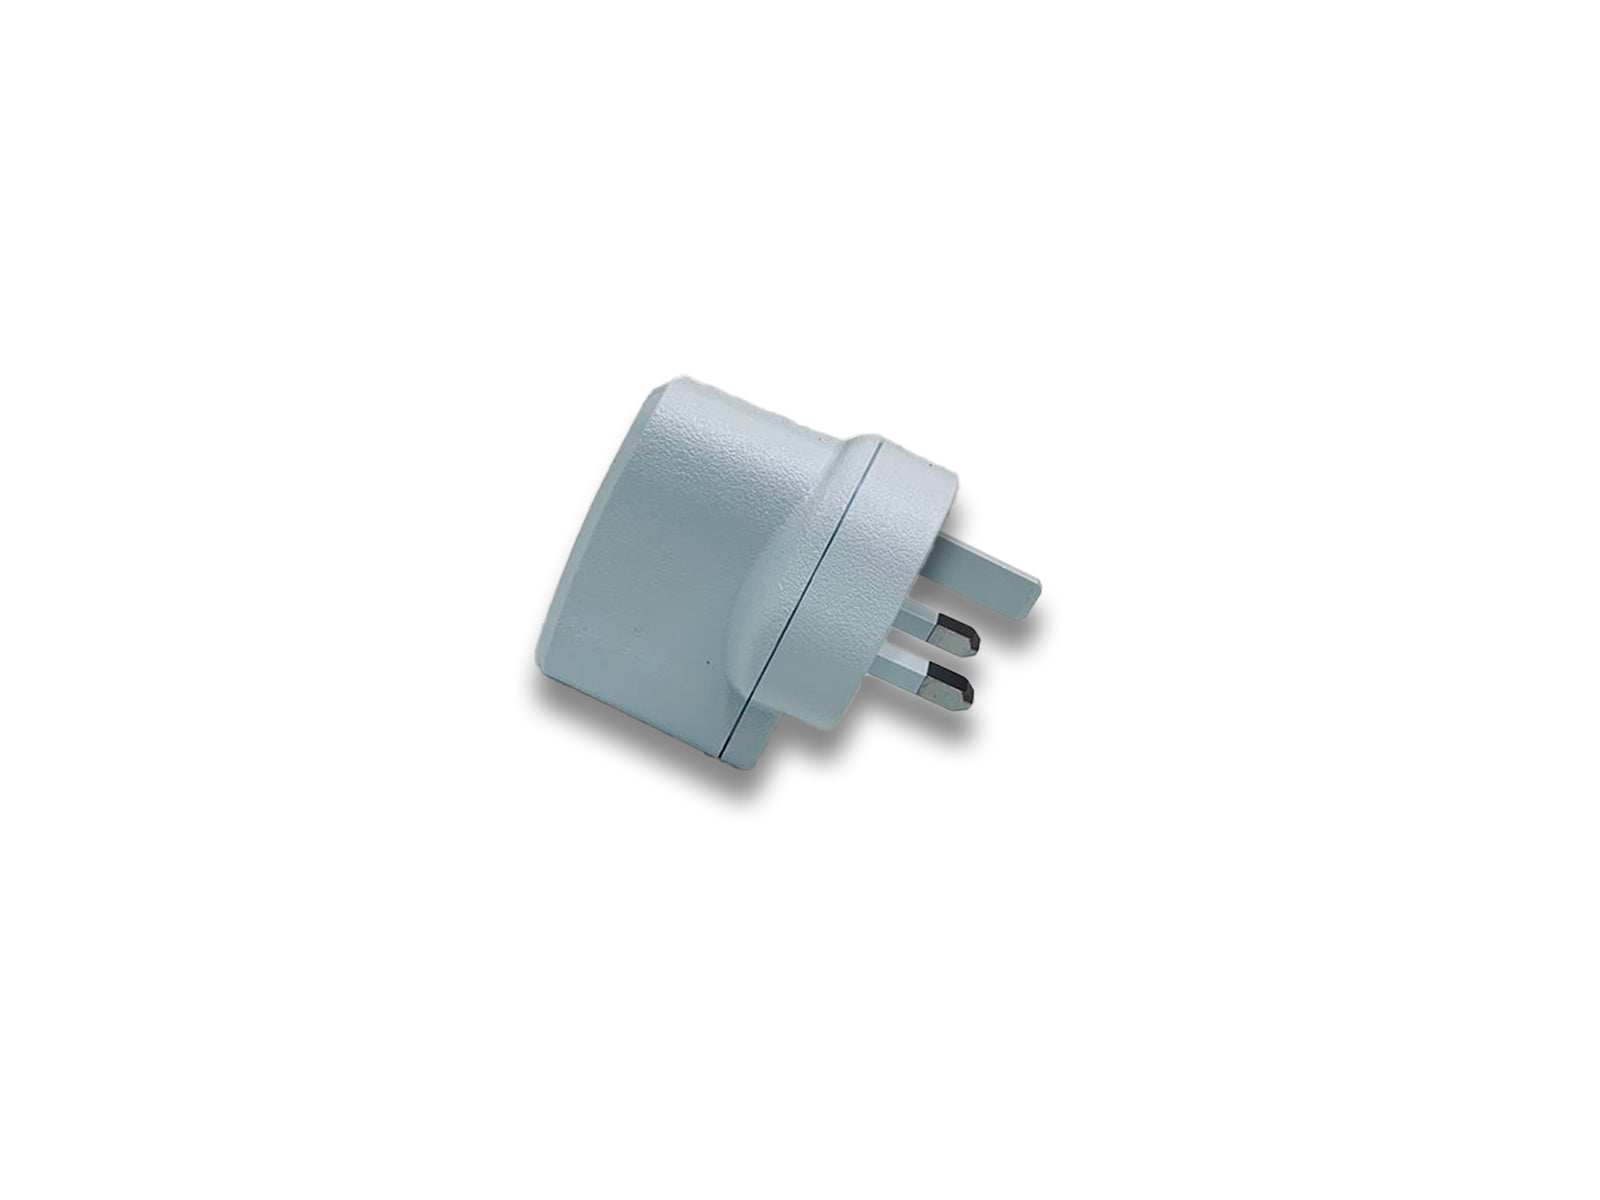 Image shows juice charger on white background